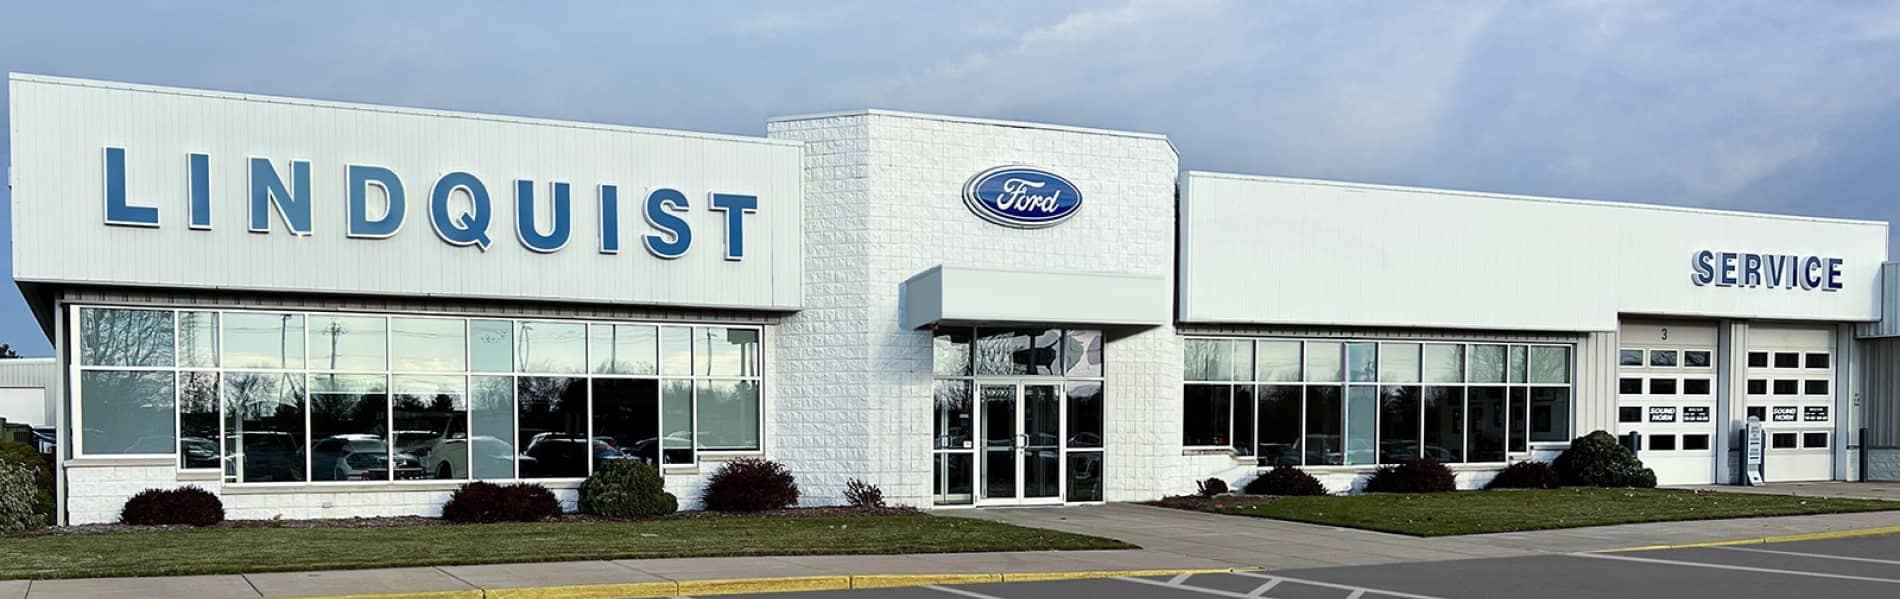 Lindquist Ford dealership front